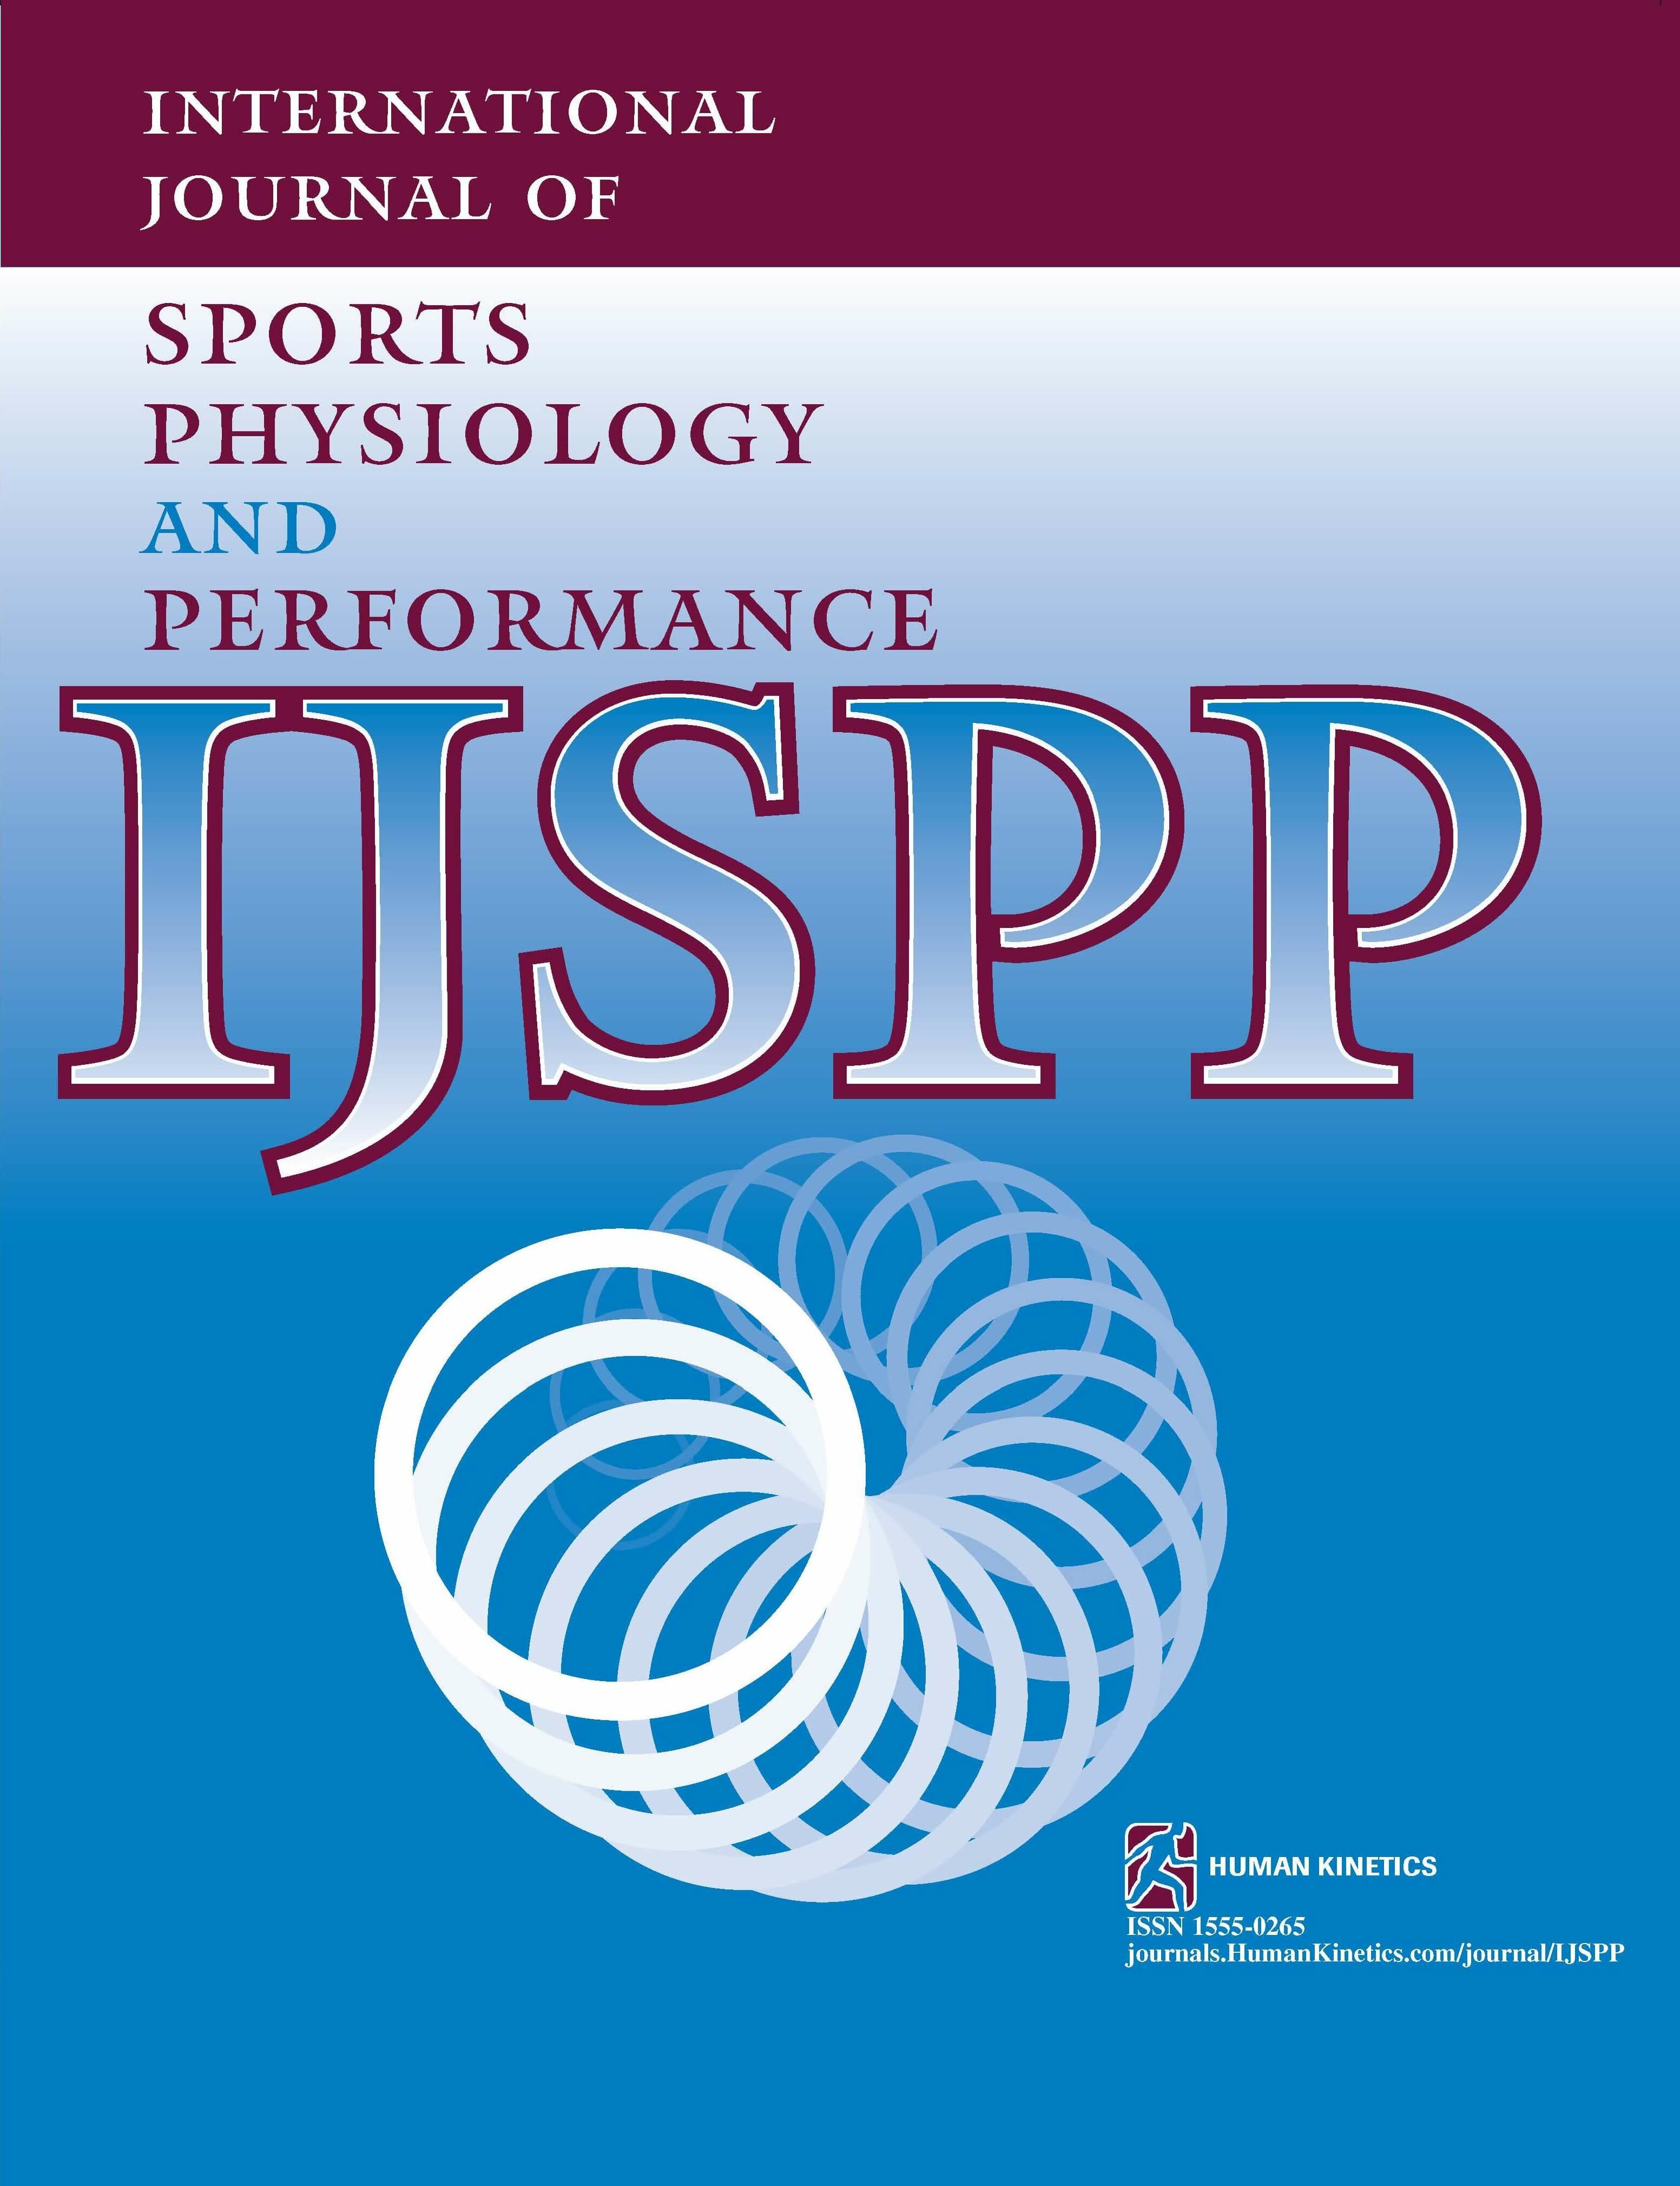 Age-Related Reference Intervals for Physical Performance Test Outcomes Relevant to Male Youth Middle Eastern Football Players